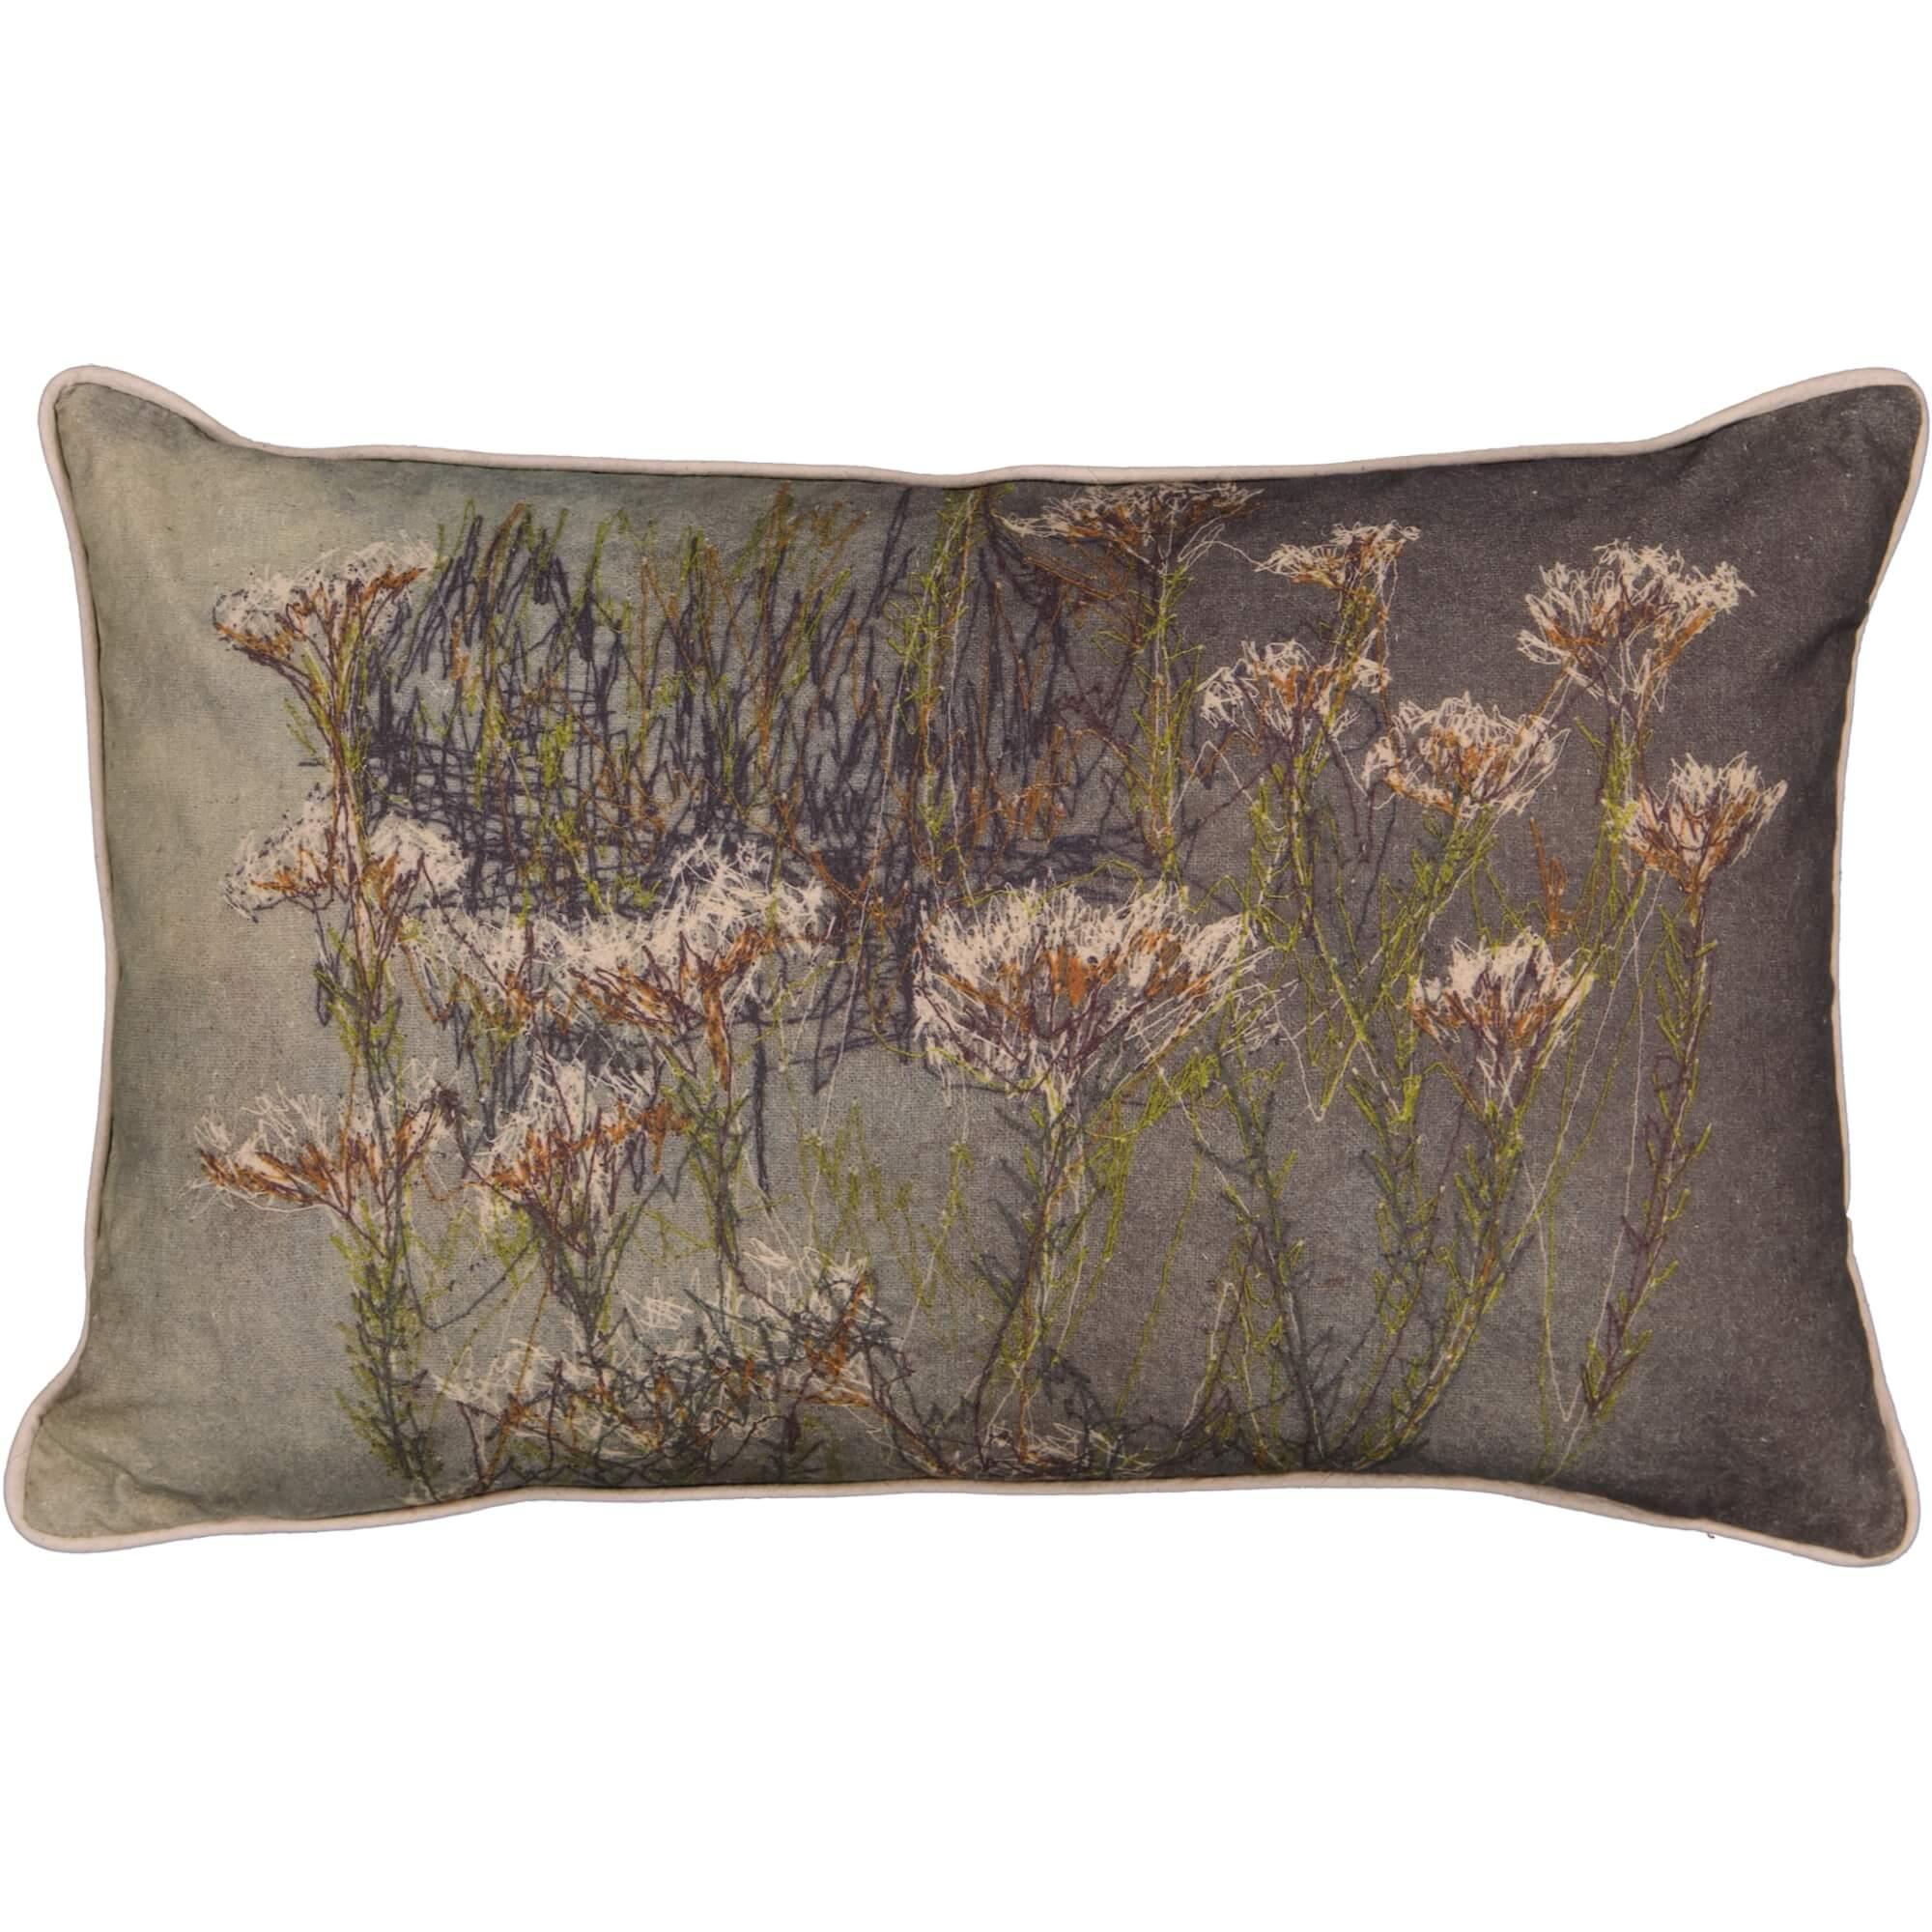 Blombos Cushion Cover (Printed)